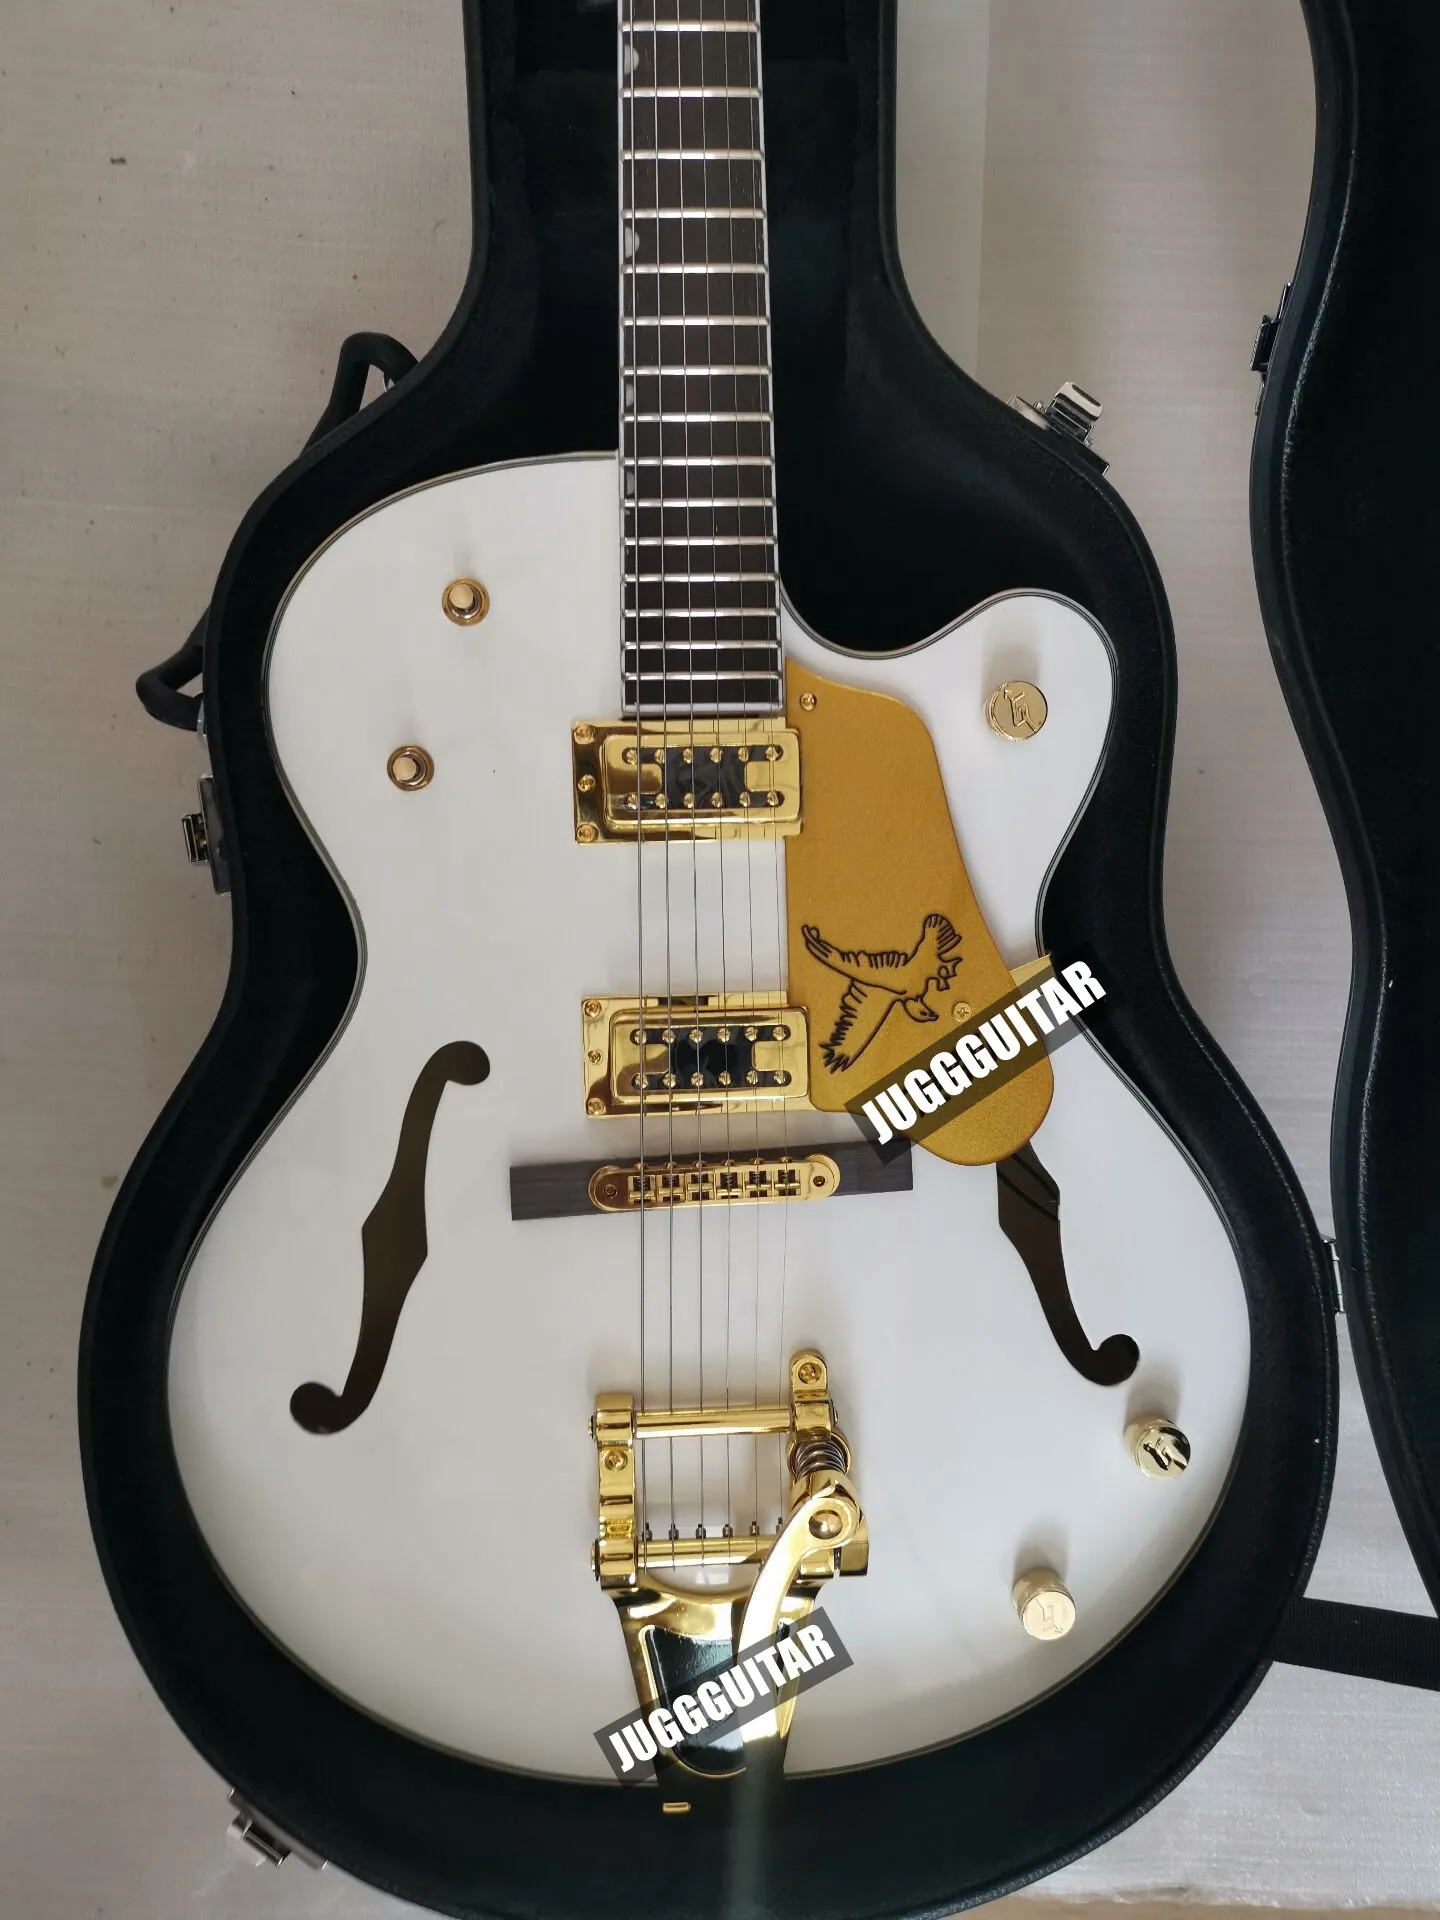 

Collector G6120 White Falcon Hollow Body Jazz Electric Guitar Gold Sparkle Binding, Bigs Tremolo Bridge, Grover Imperial Tuners